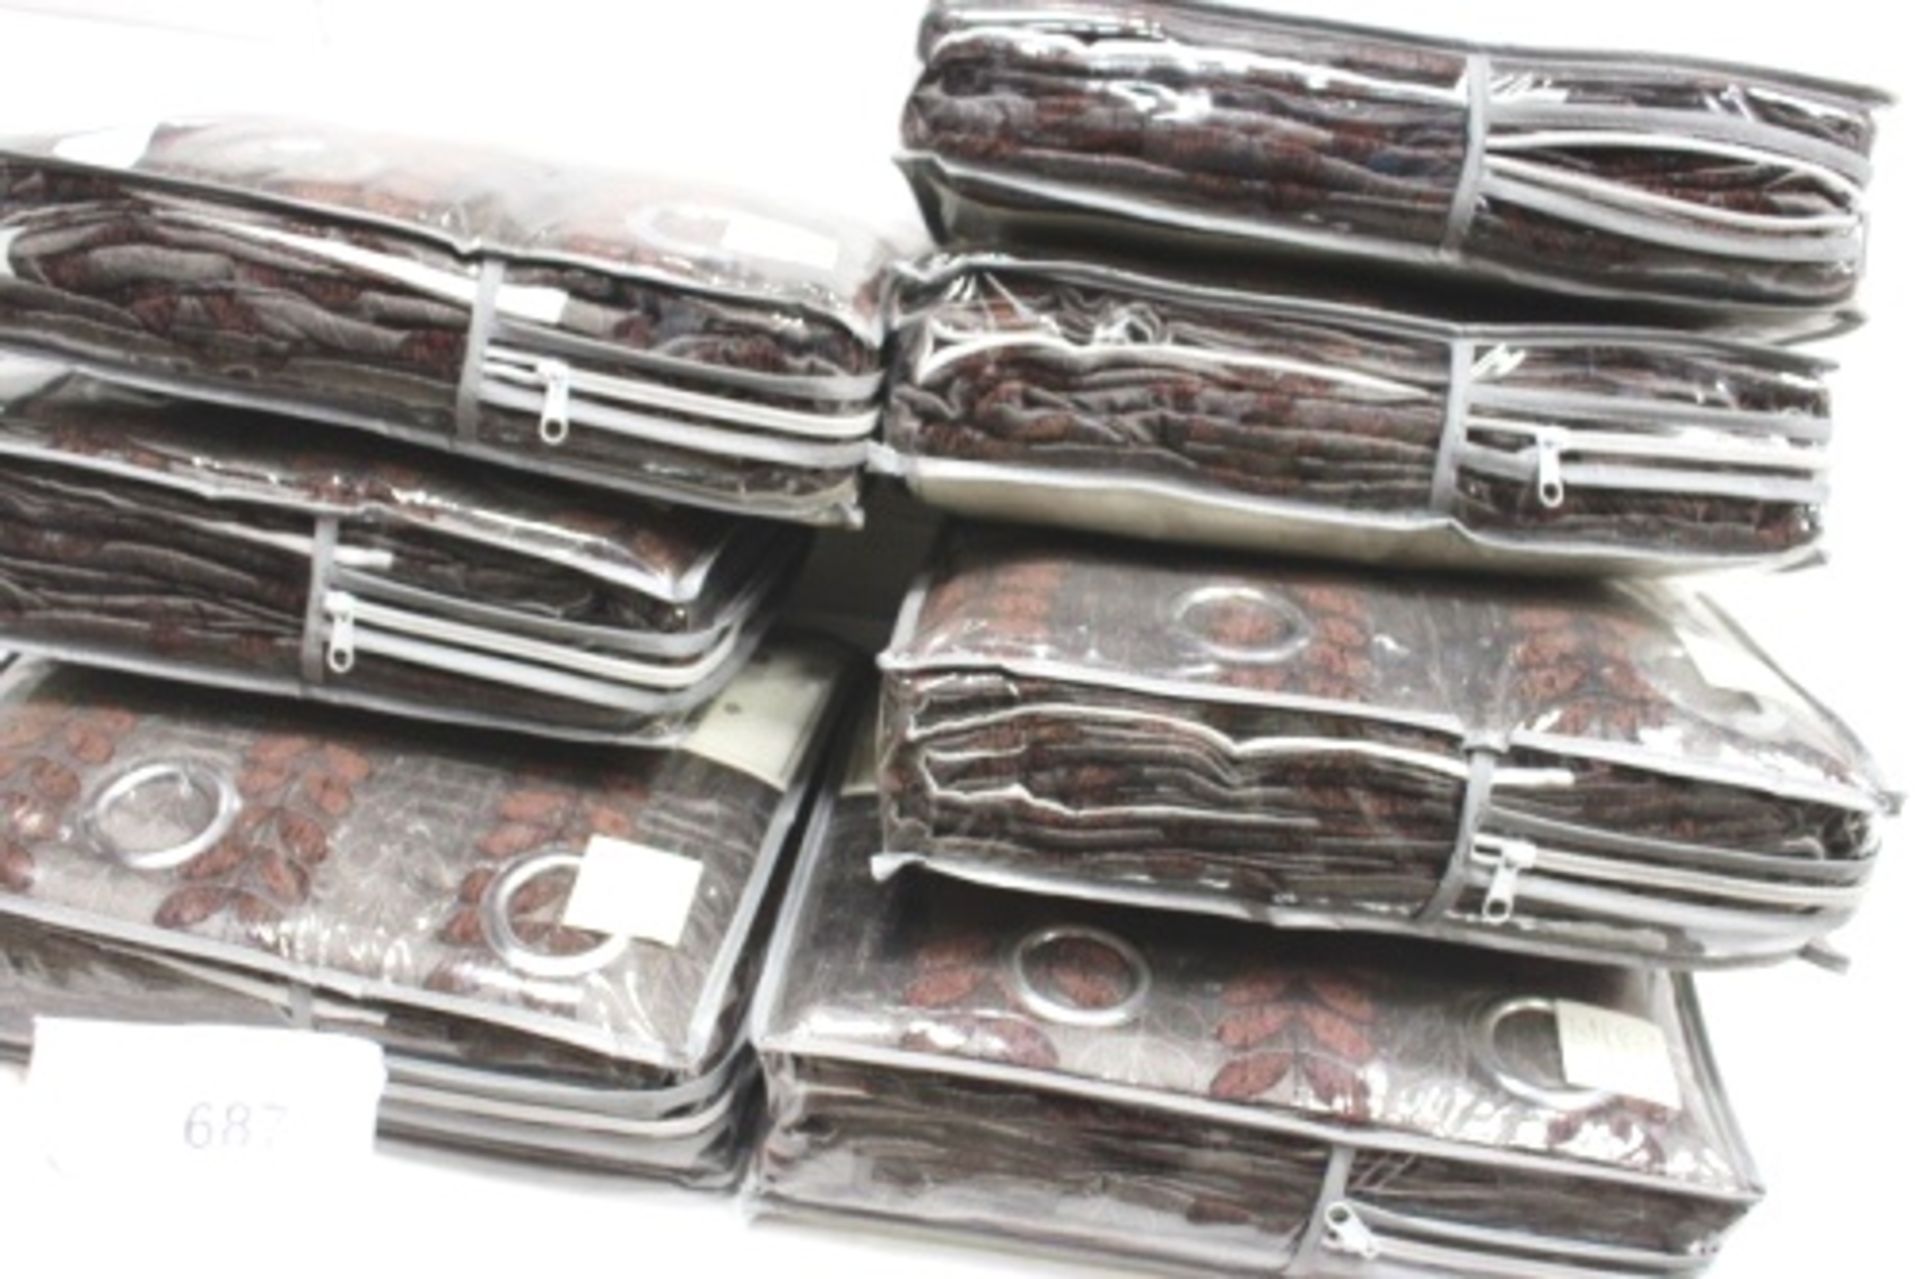 7 x pairs of Jeff Banks Home Sierra lined RME choc lined curtains, size 168 x 183cm - New in pack, - Image 3 of 3